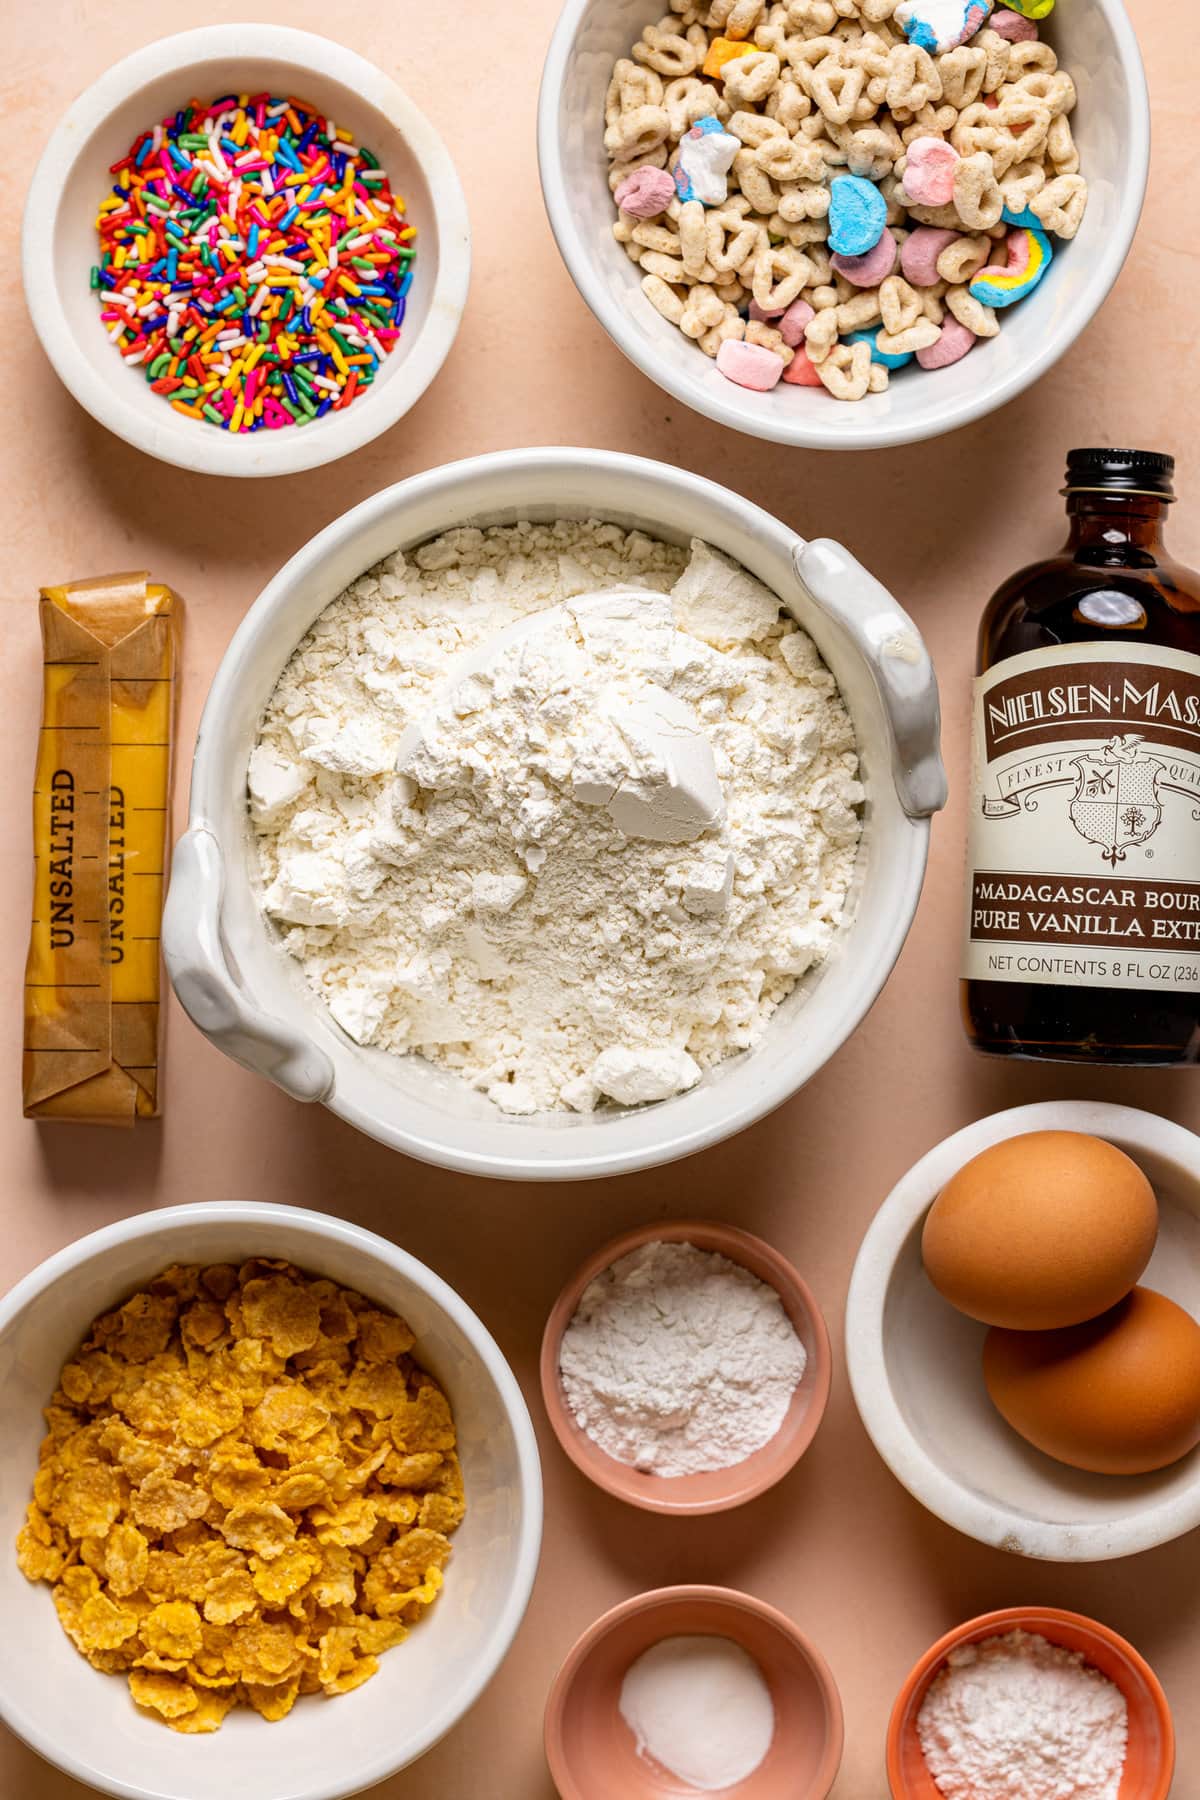 Ingredients for Loaded Lucky Charms Cornflakes Sugar Cookies including vanilla extract, eggs, butter, and sprinkles